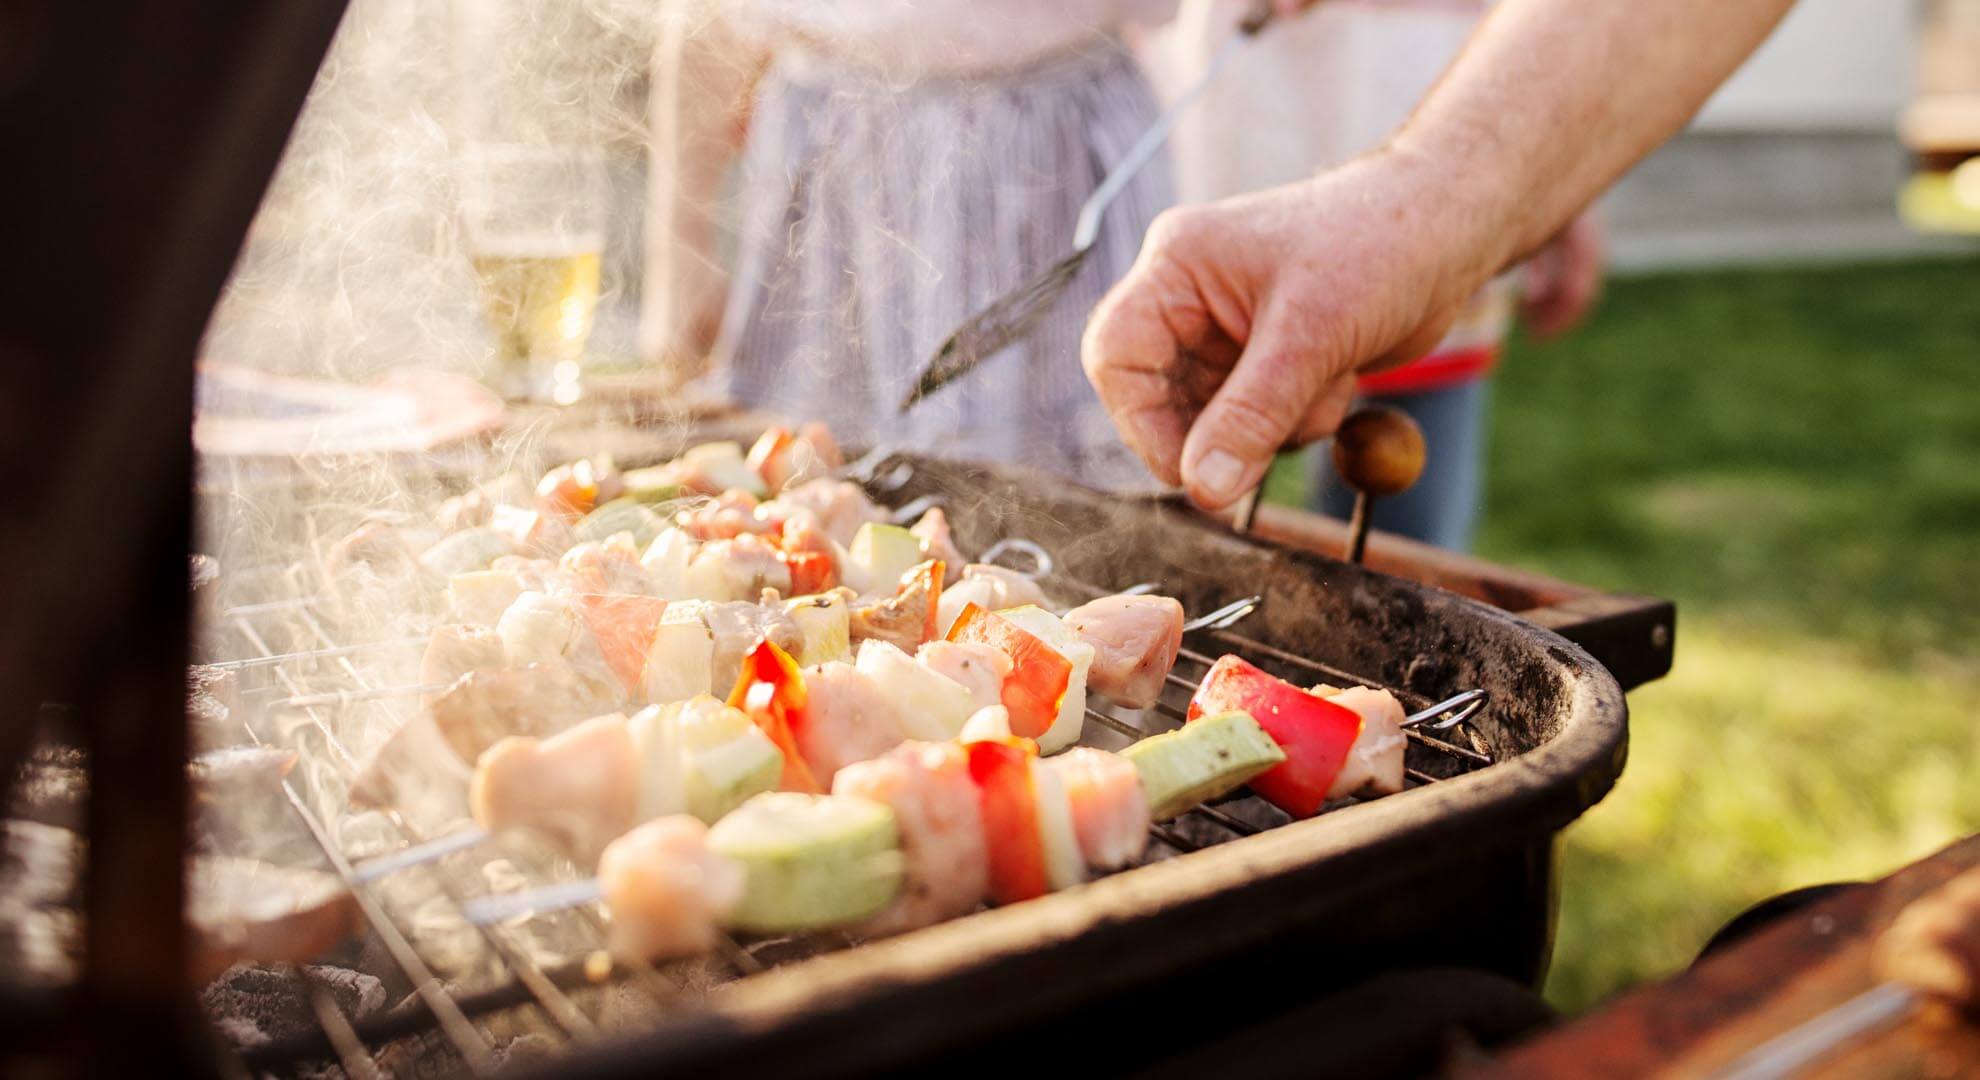 A person cooking skewered food on a BBQ